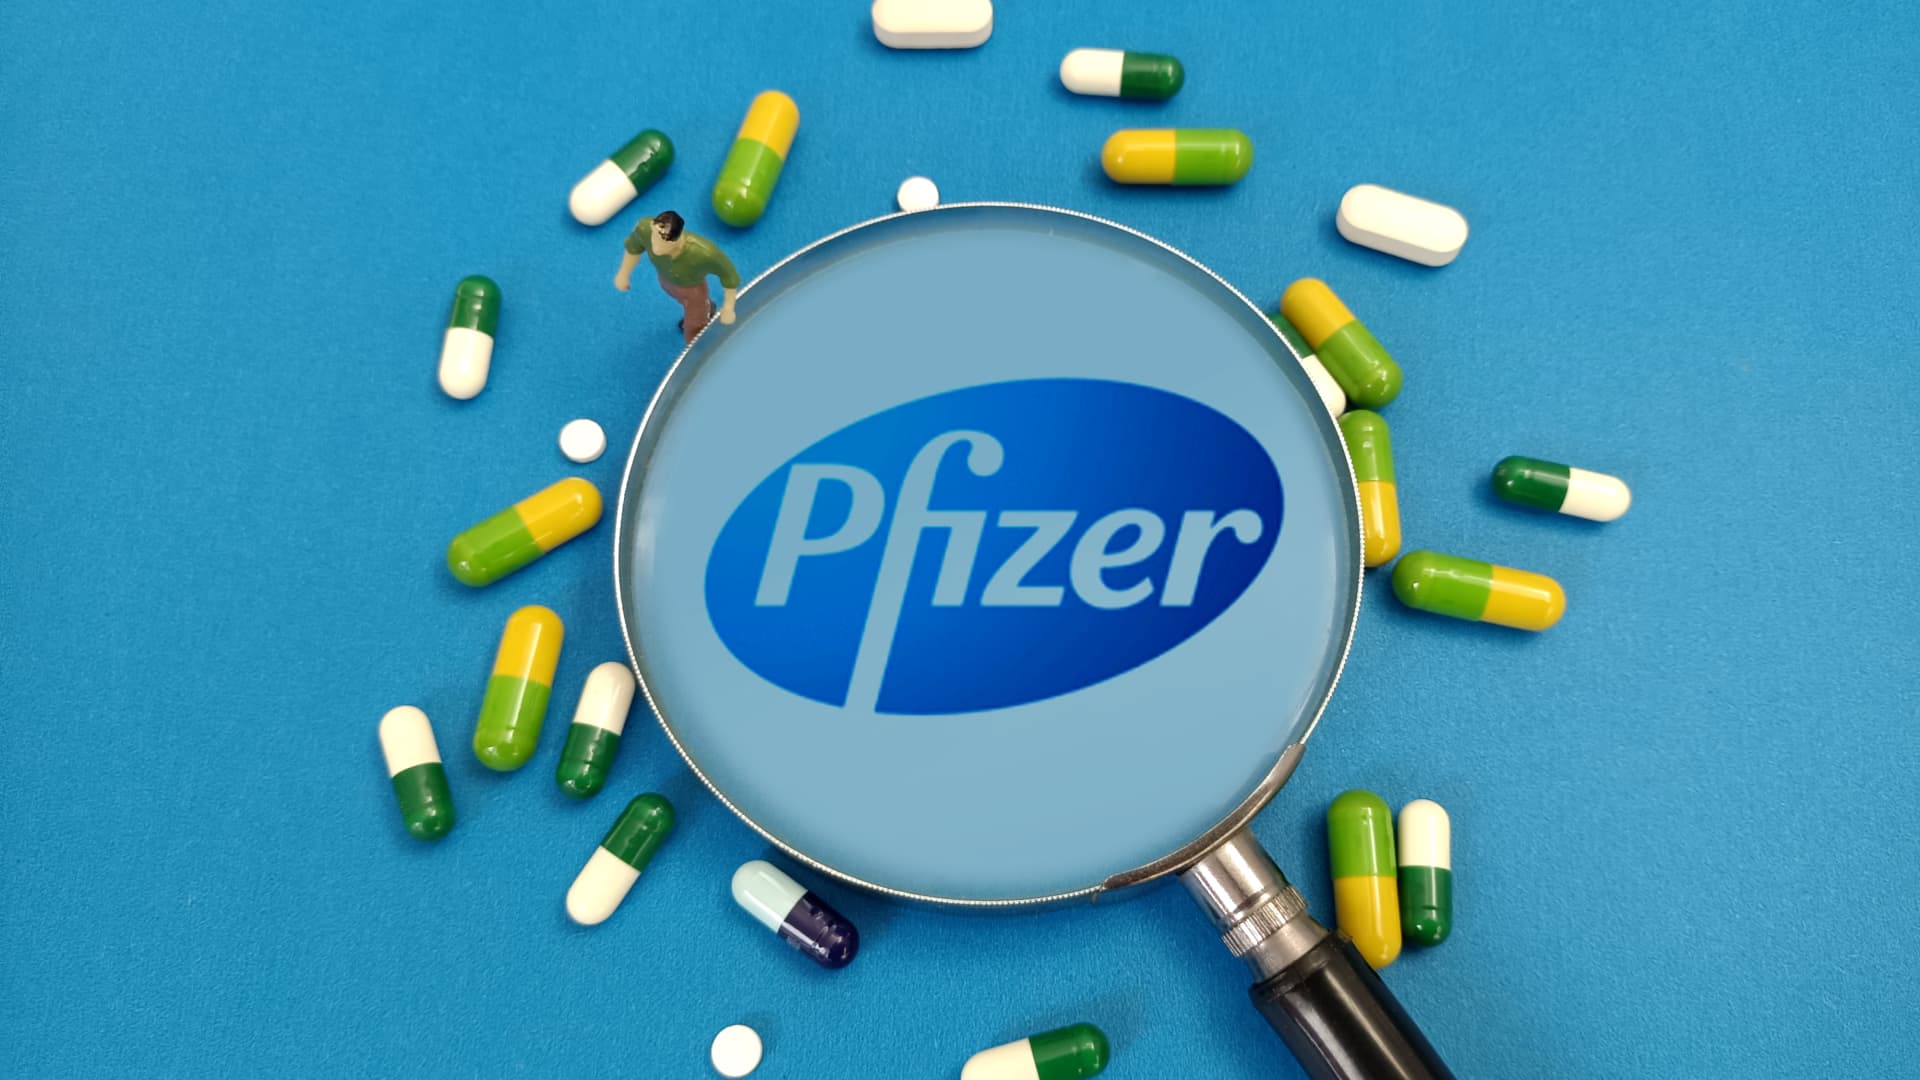 Pfizer enters weight loss drug market with Novo Nordisk, Eli Lilly